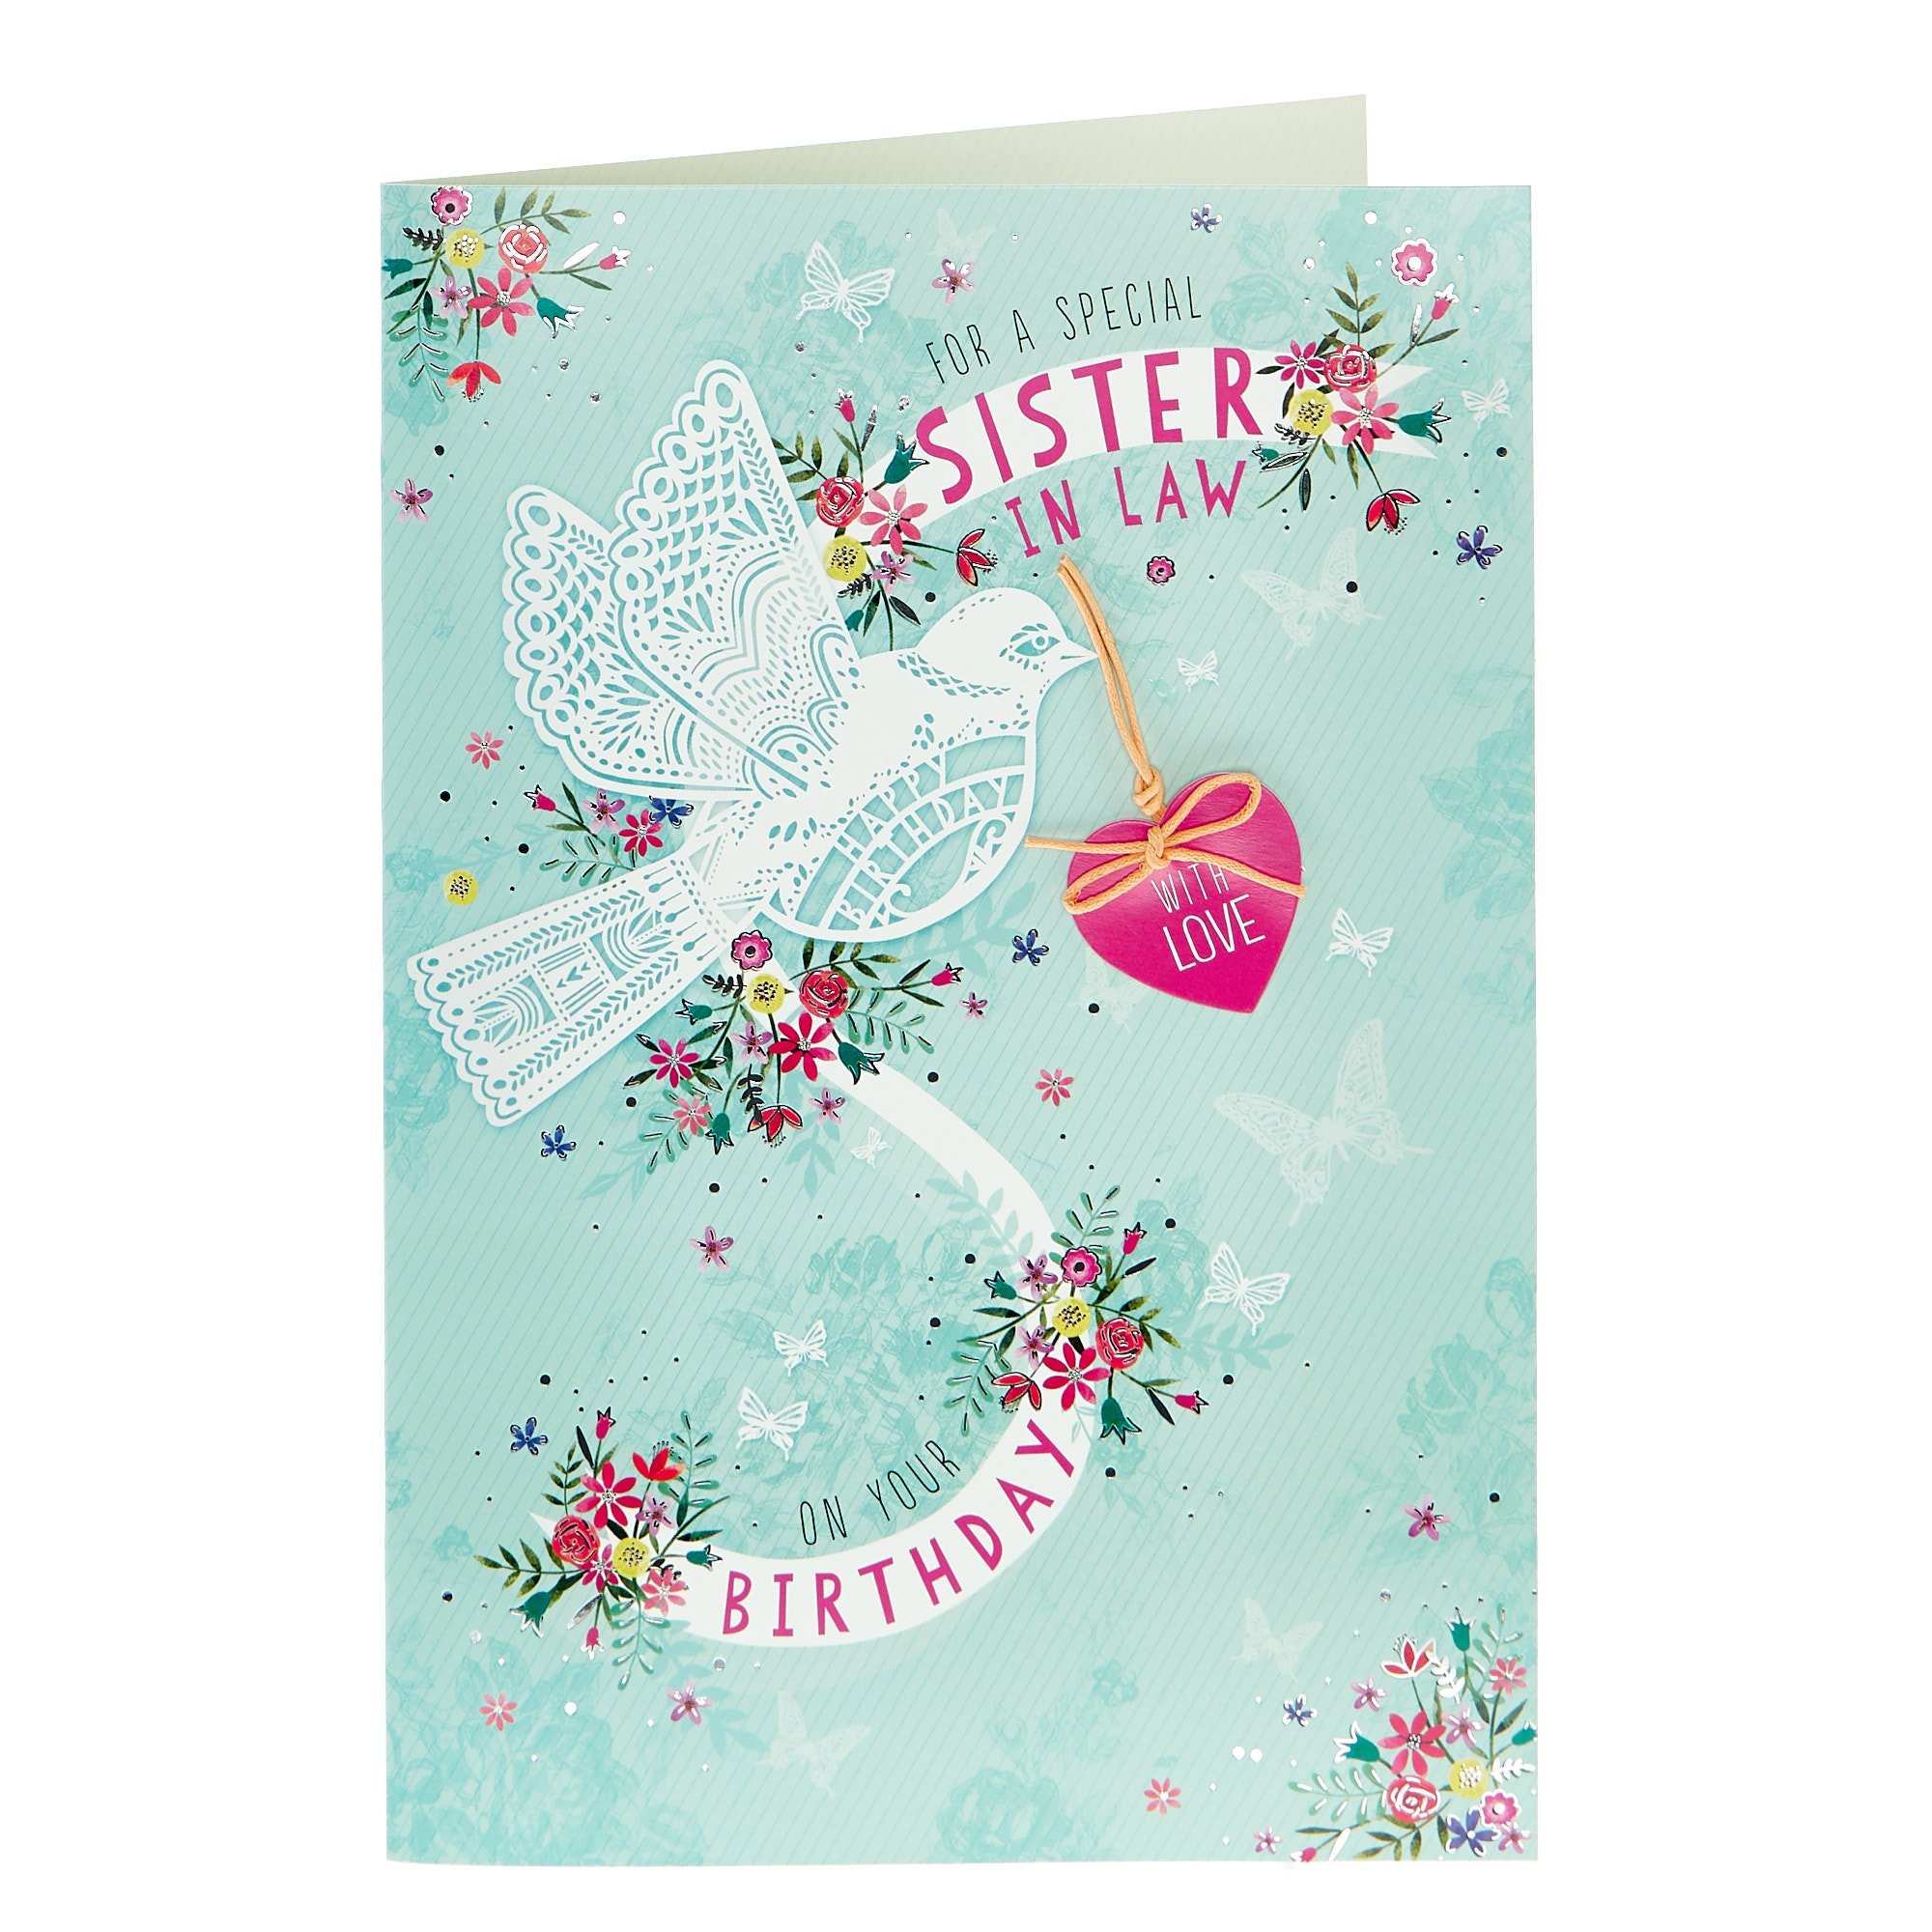 Birthday Card - Special Sister in Law With Love